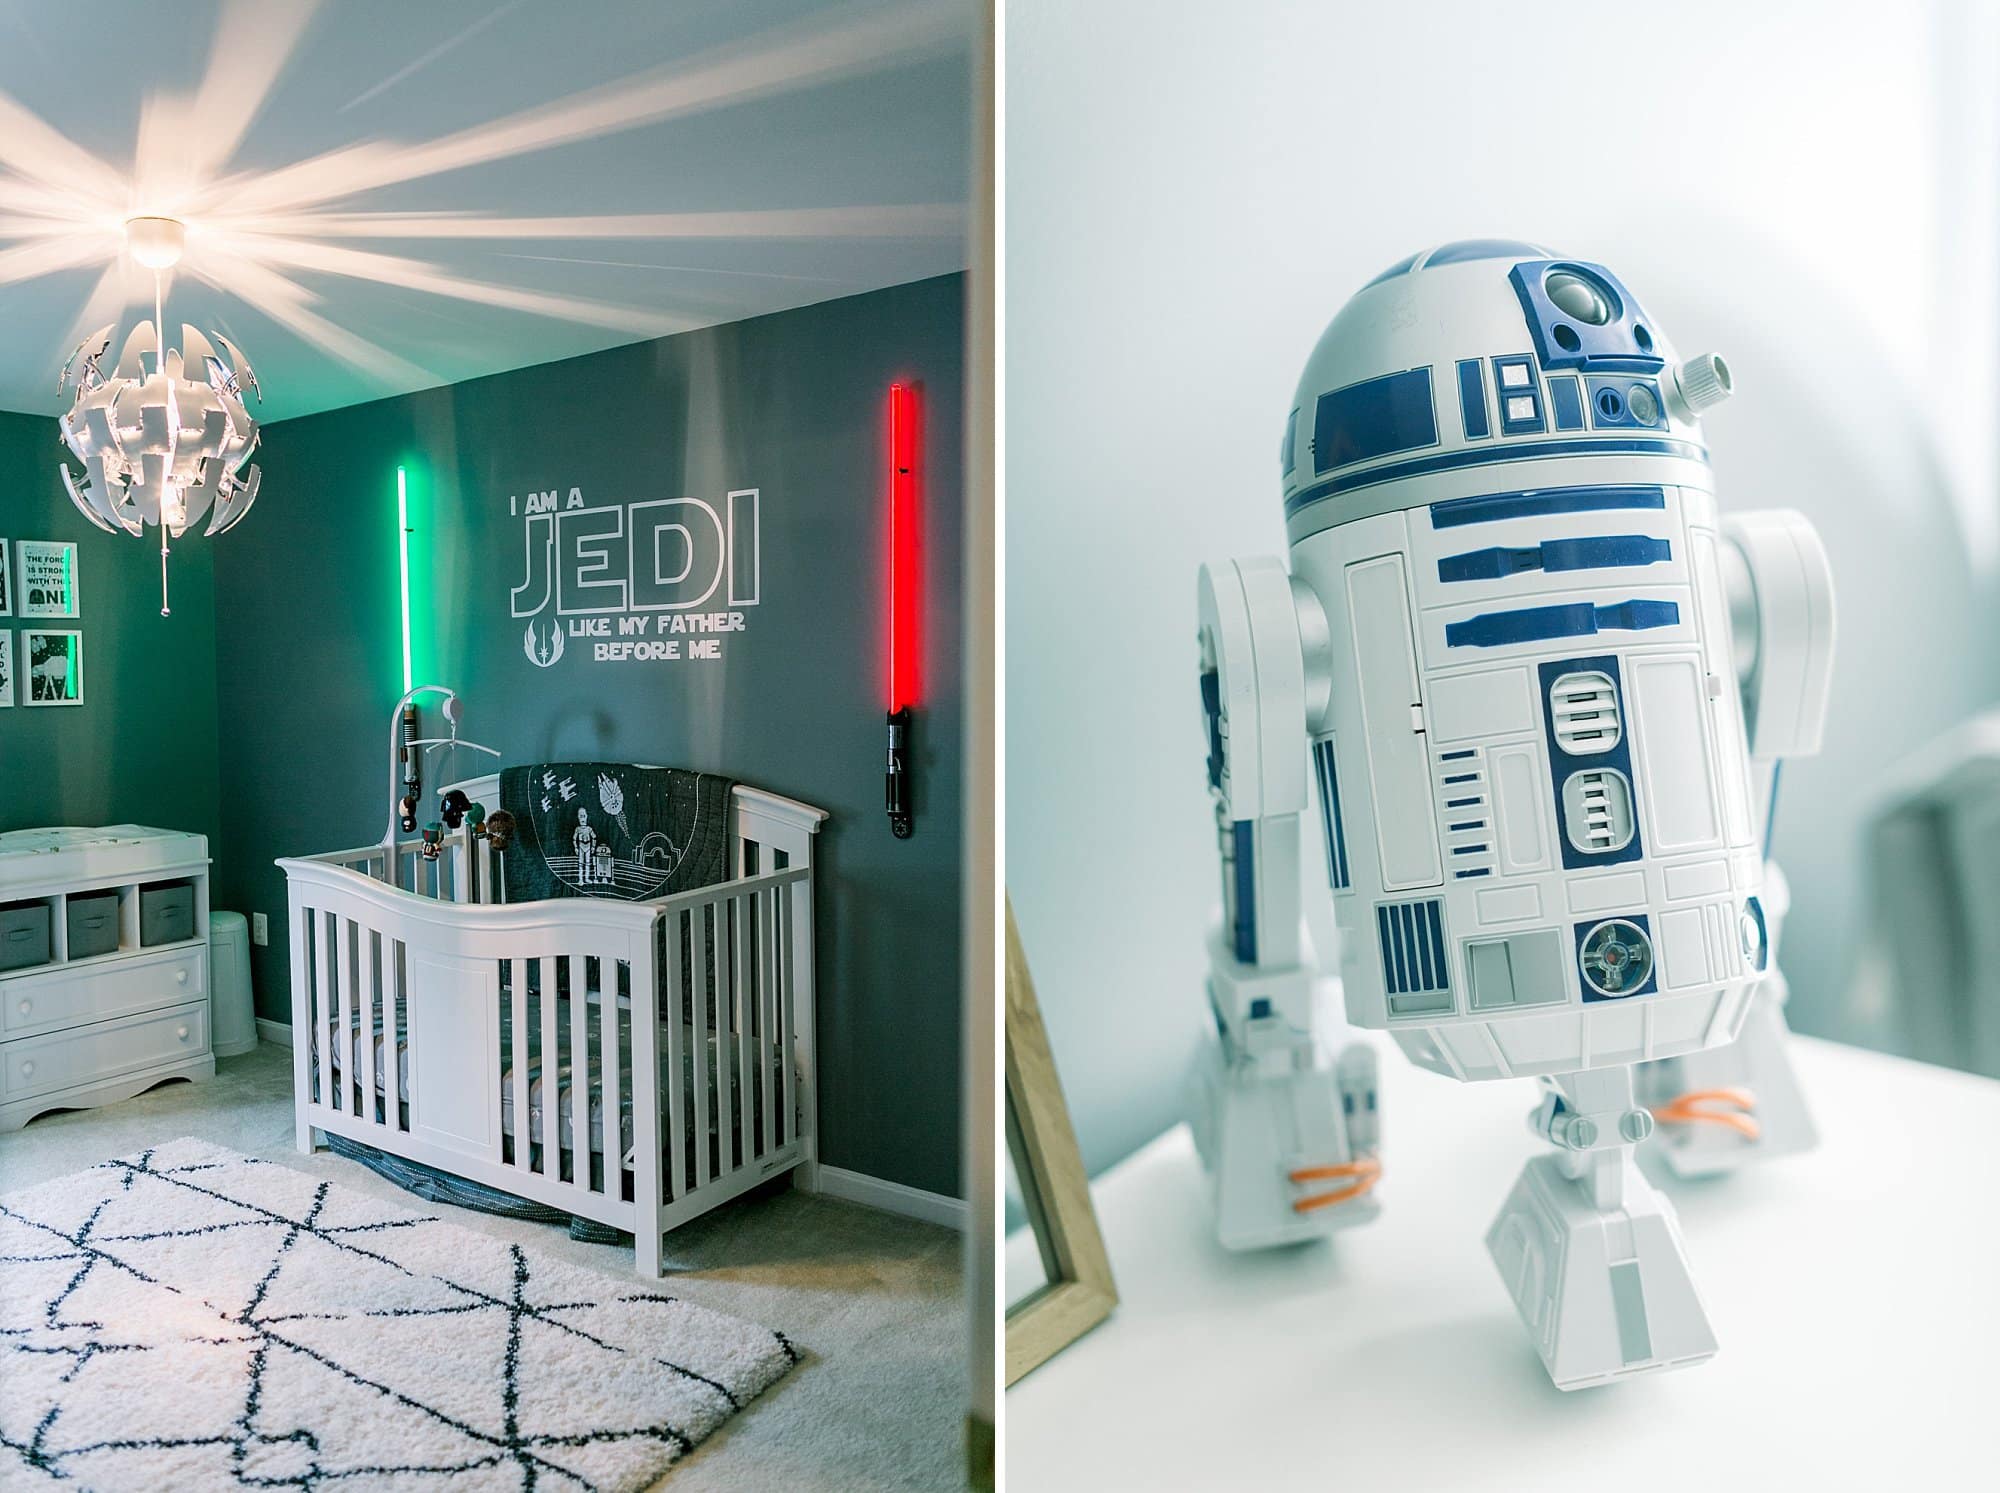 Star wars nursery - r2d2 model on dresser, green and red lightsabers lit up on wall over white crib in gray room